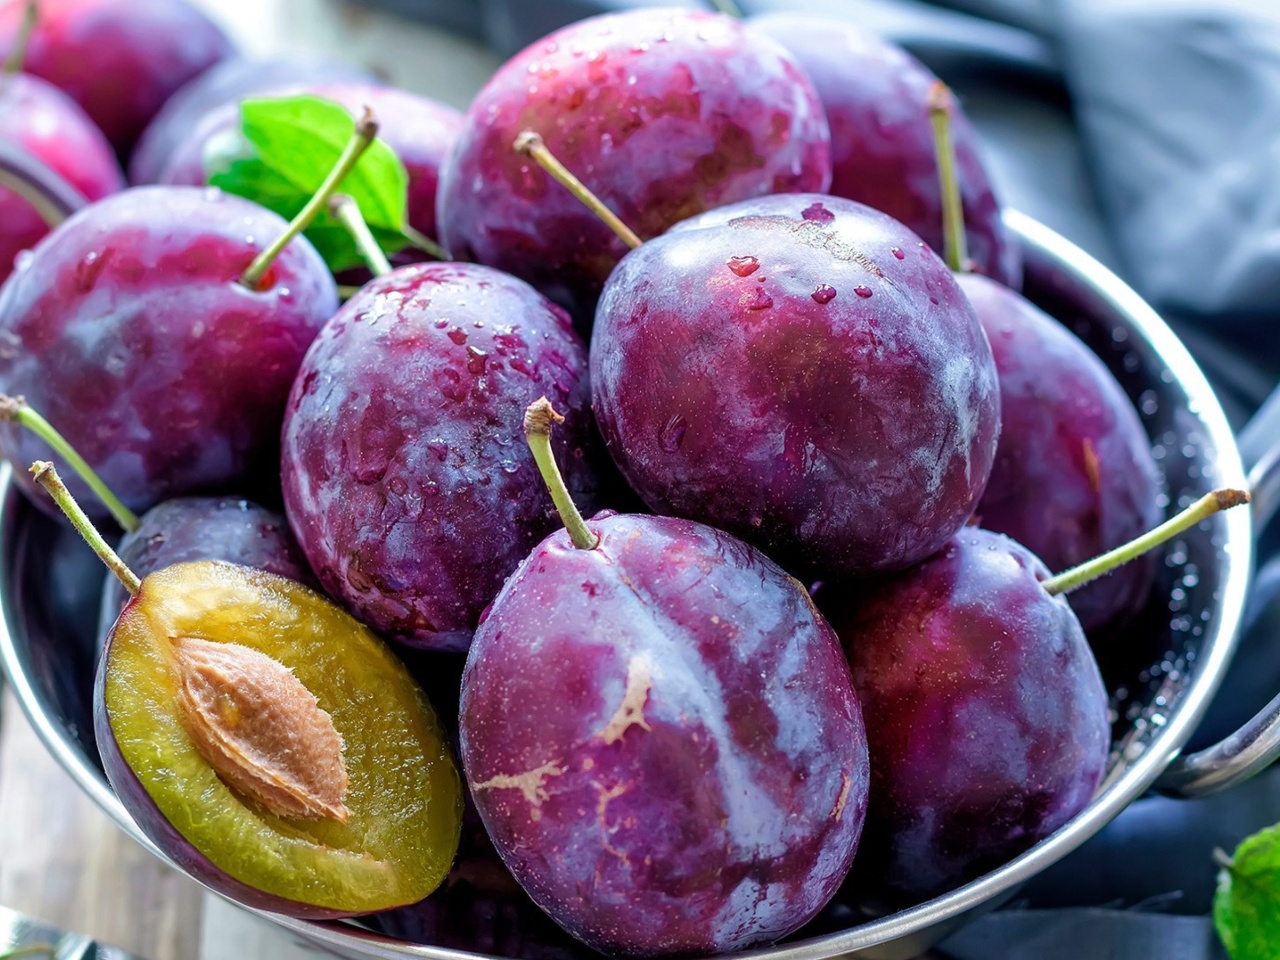 Das Plums with Vitamins Wallpaper 1280x960